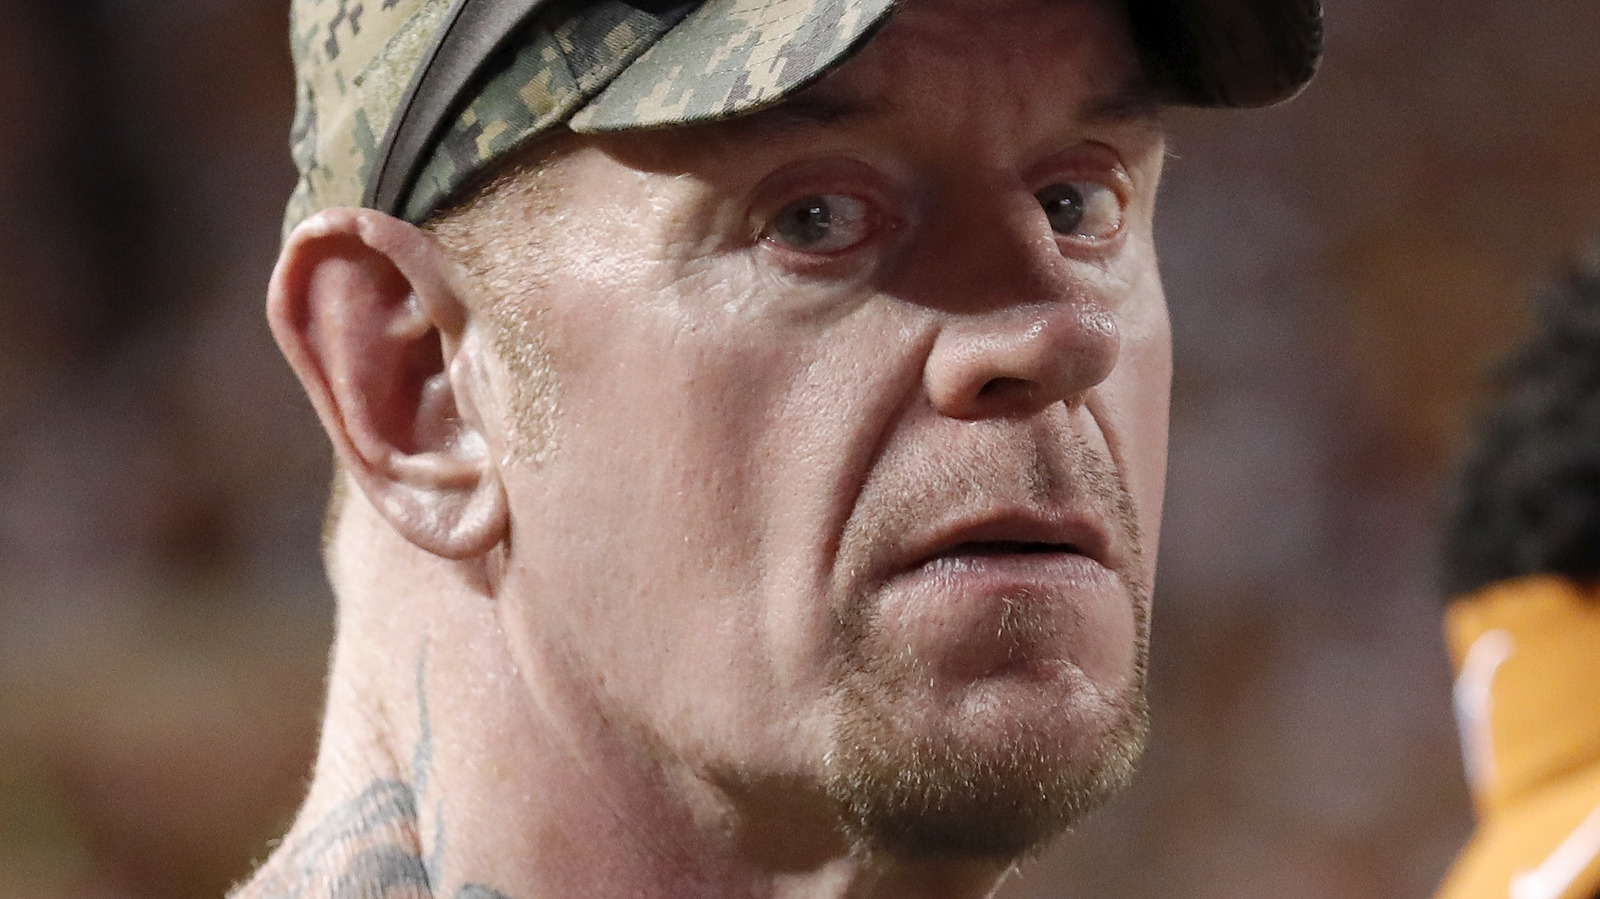 undertaker without makeup